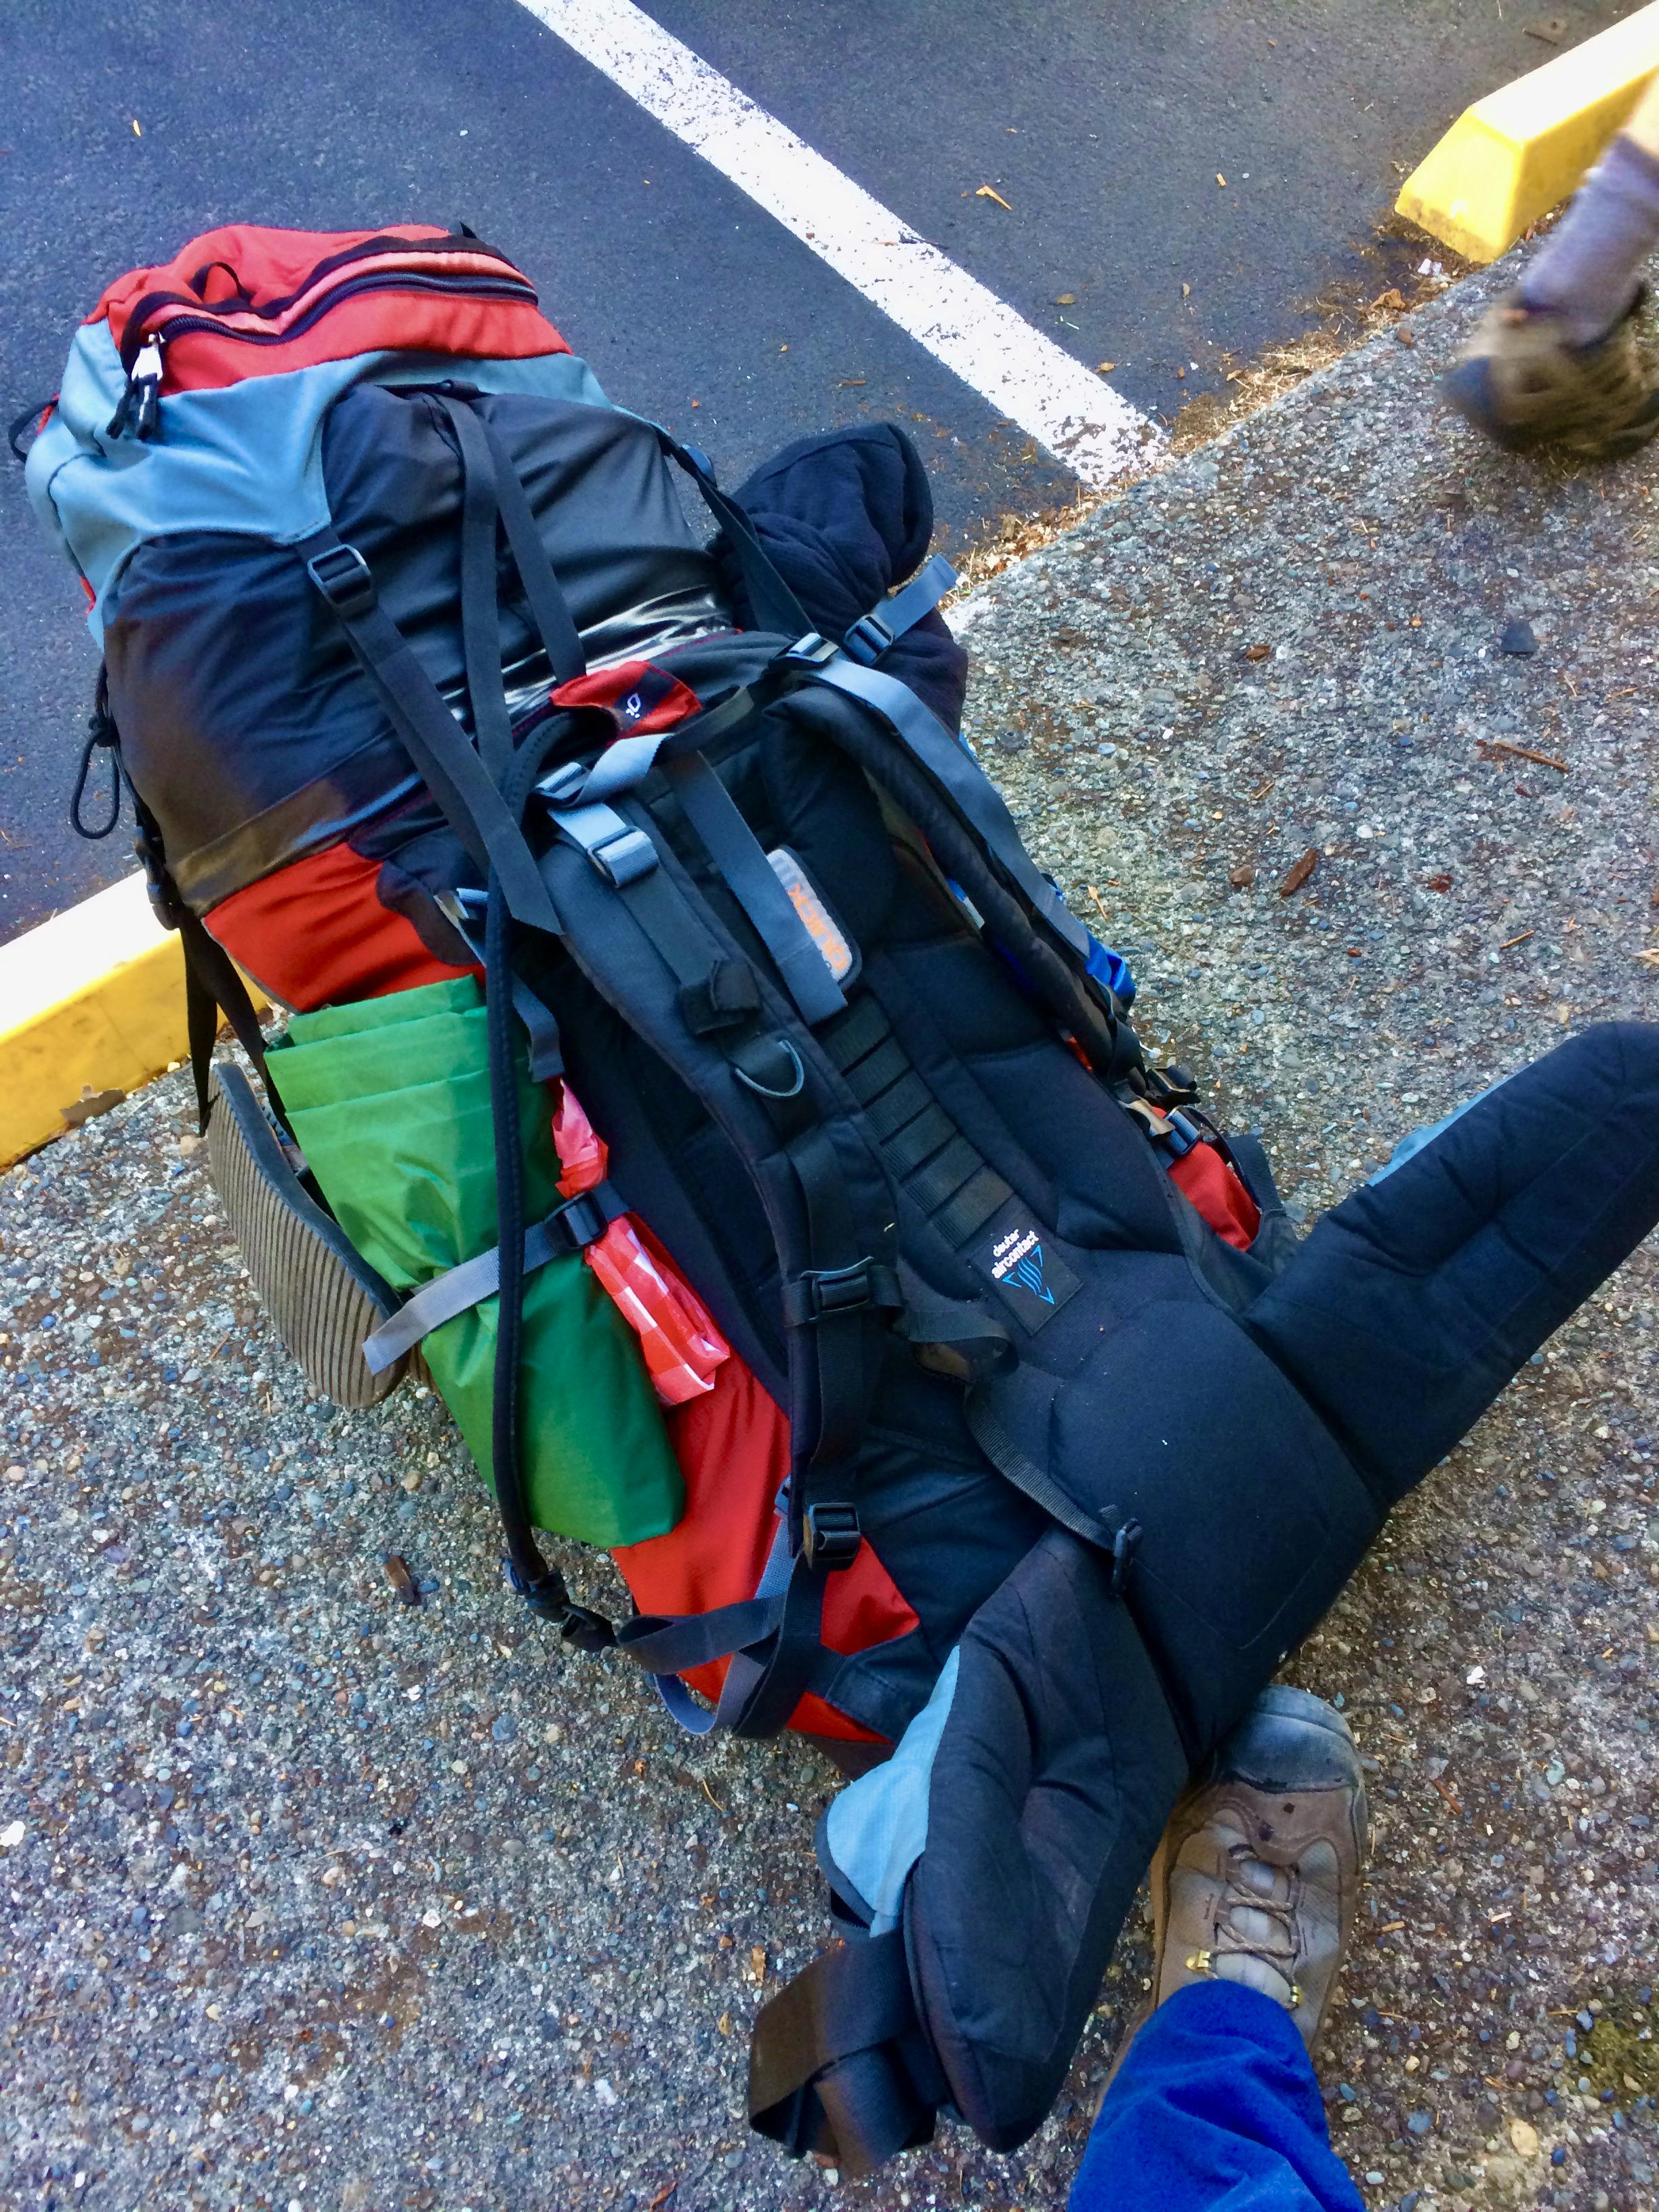 A nicely packed pack is a beautiful thing. Image credit: Dan Purdy